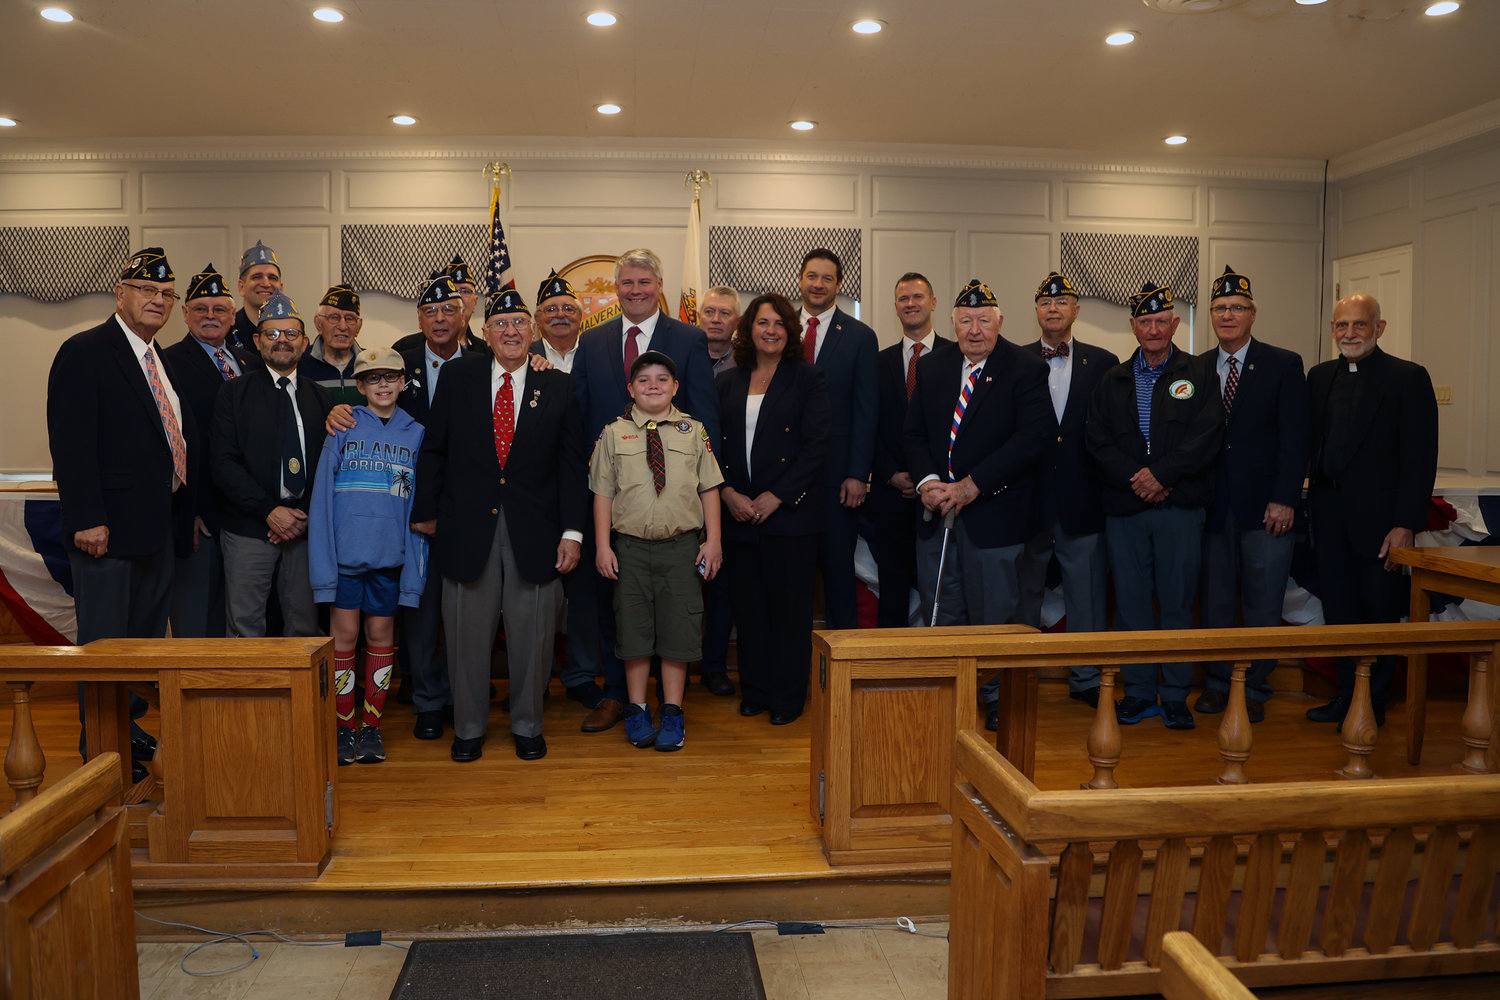 Veterans from American Legion Post 44 joined members of Malverne’s board of trustees and other honored guests at the village’s annual Veterans Day ceremony.